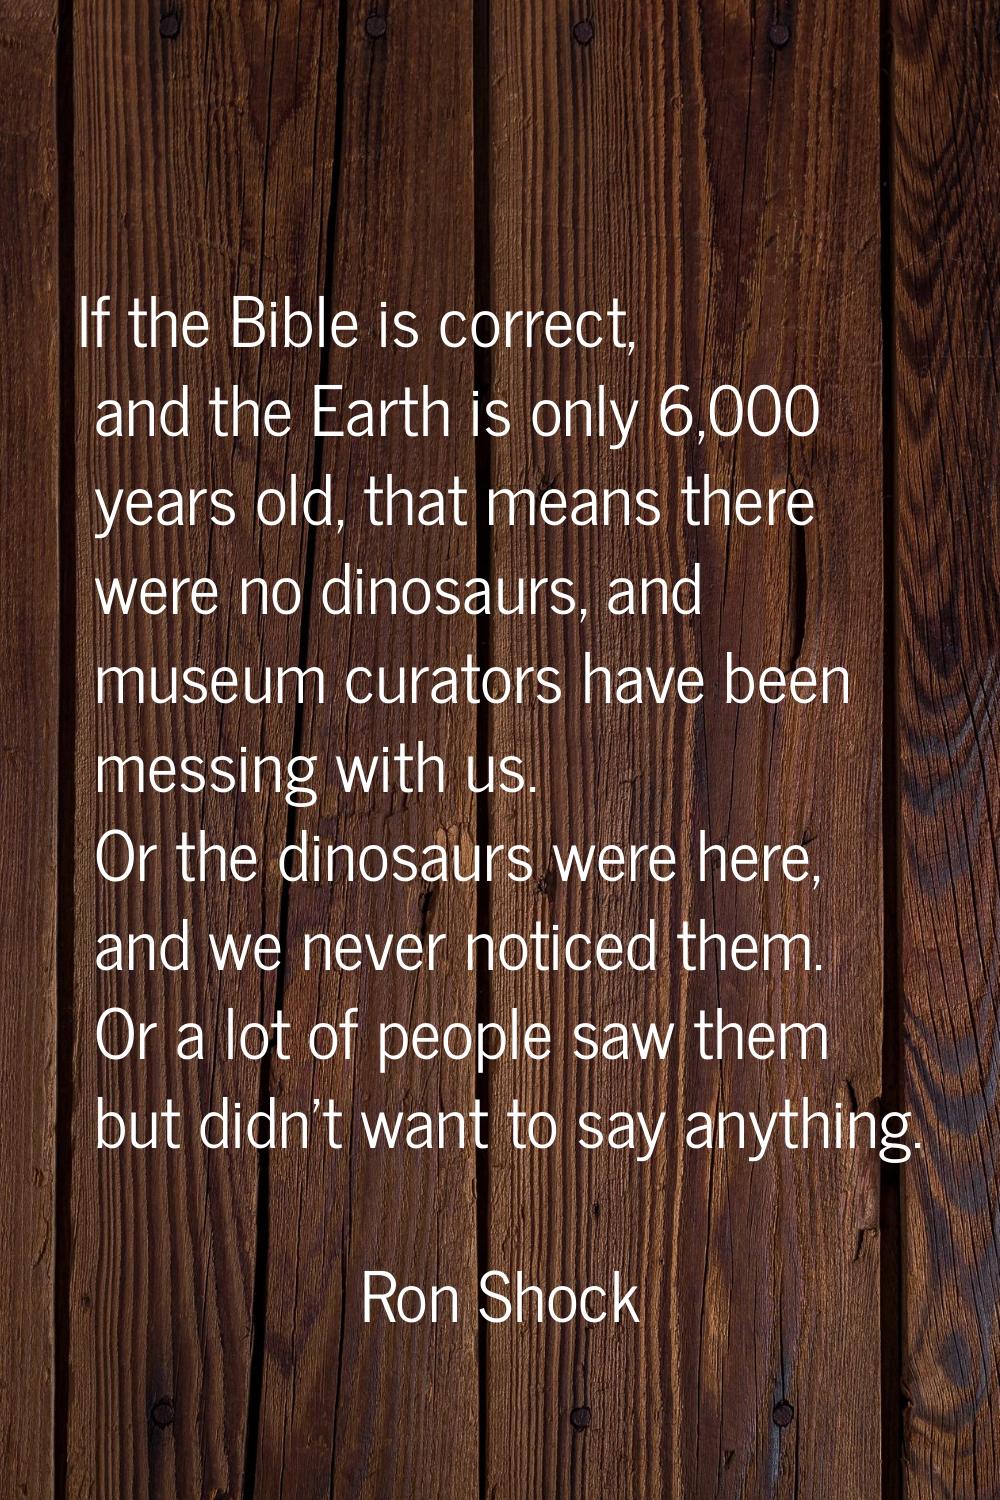 If the Bible is correct, and the Earth is only 6,000 years old, that means there were no dinosaurs,